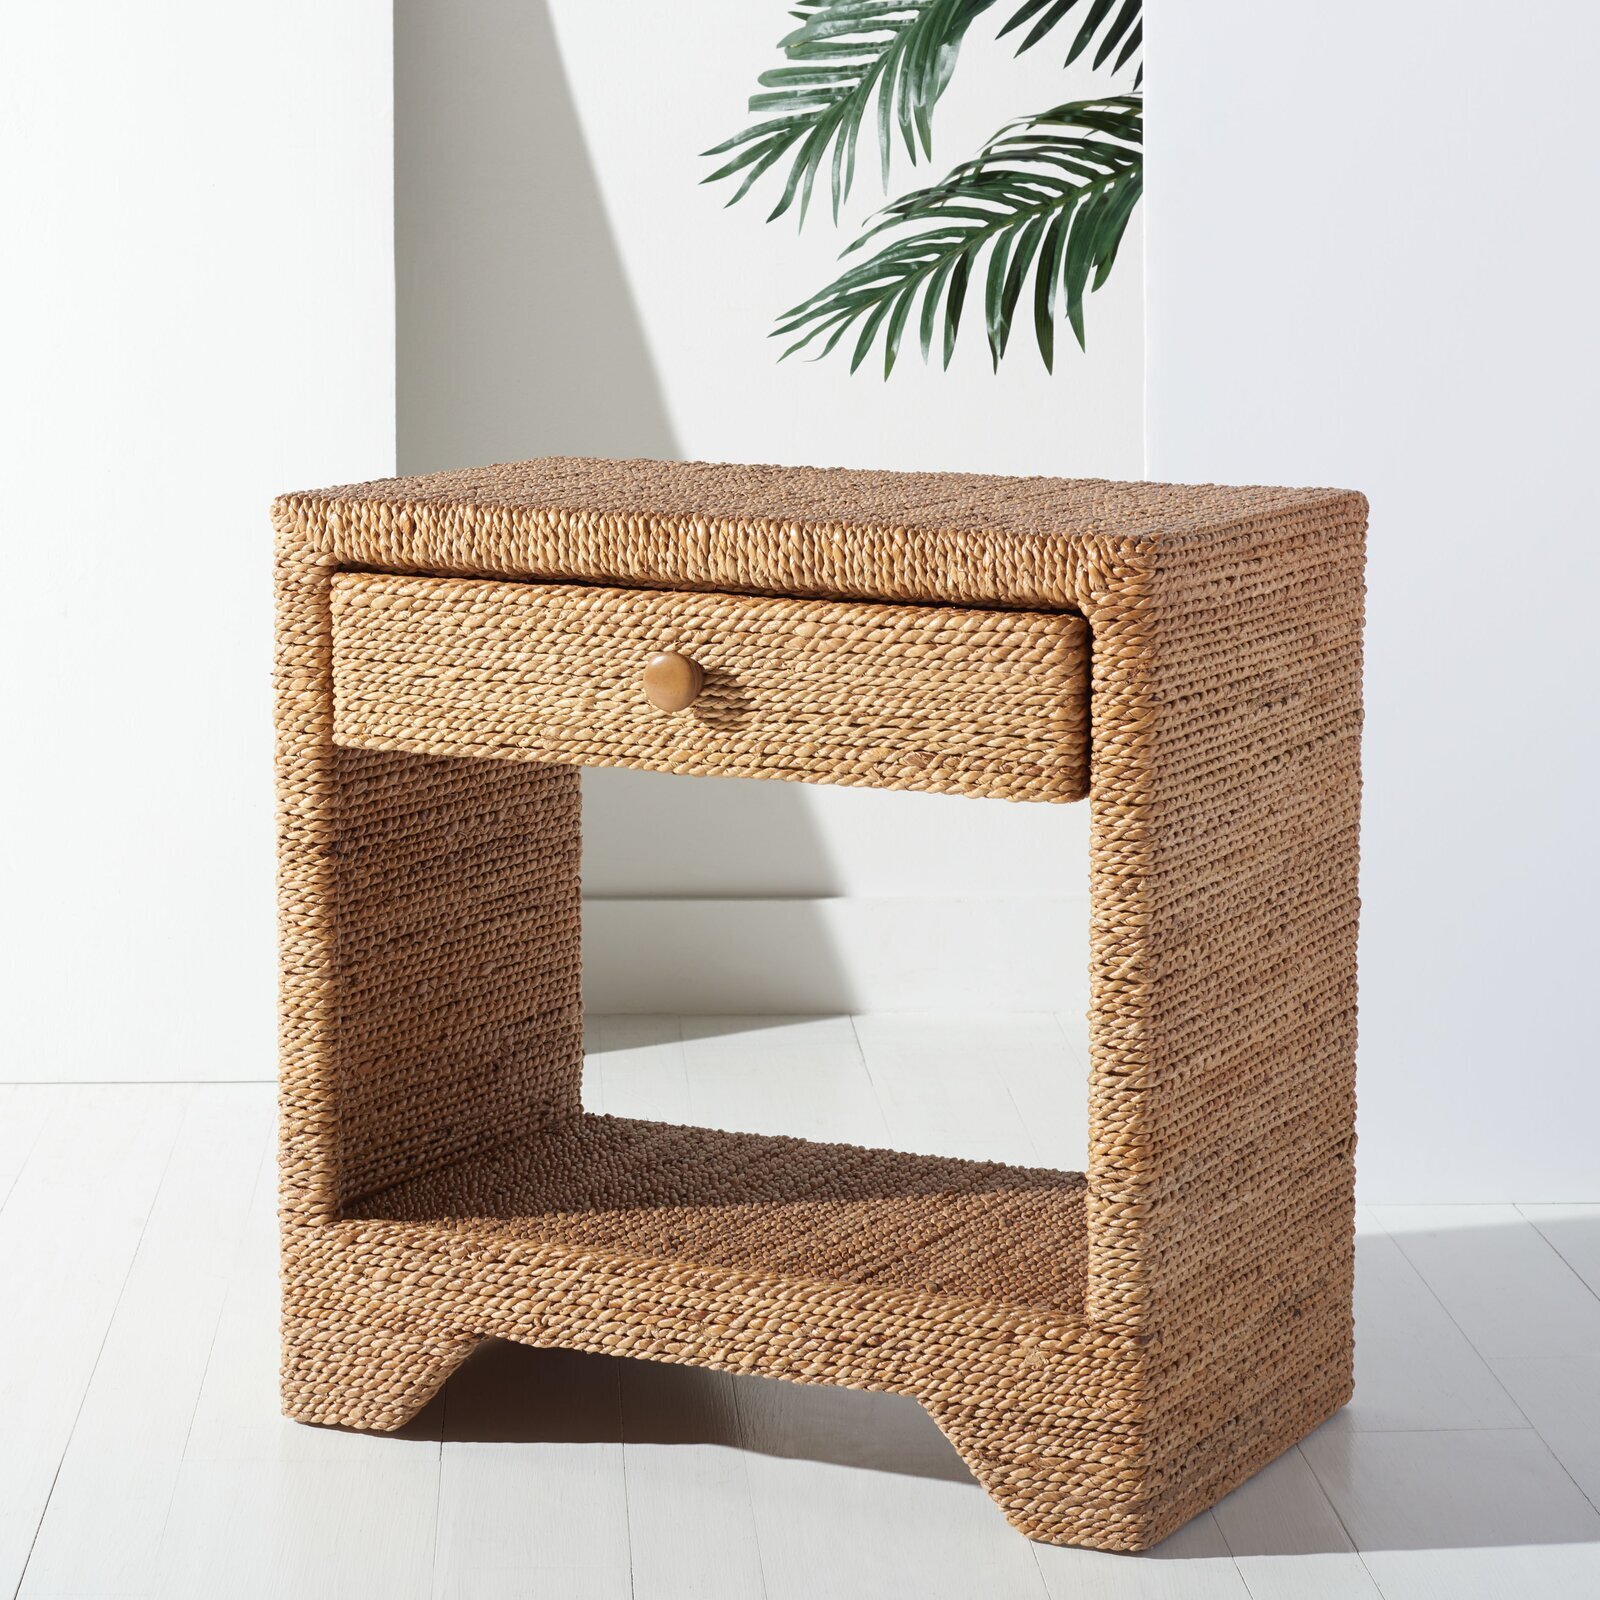 Tropical Themed Nightstand With Woven Rope Texture